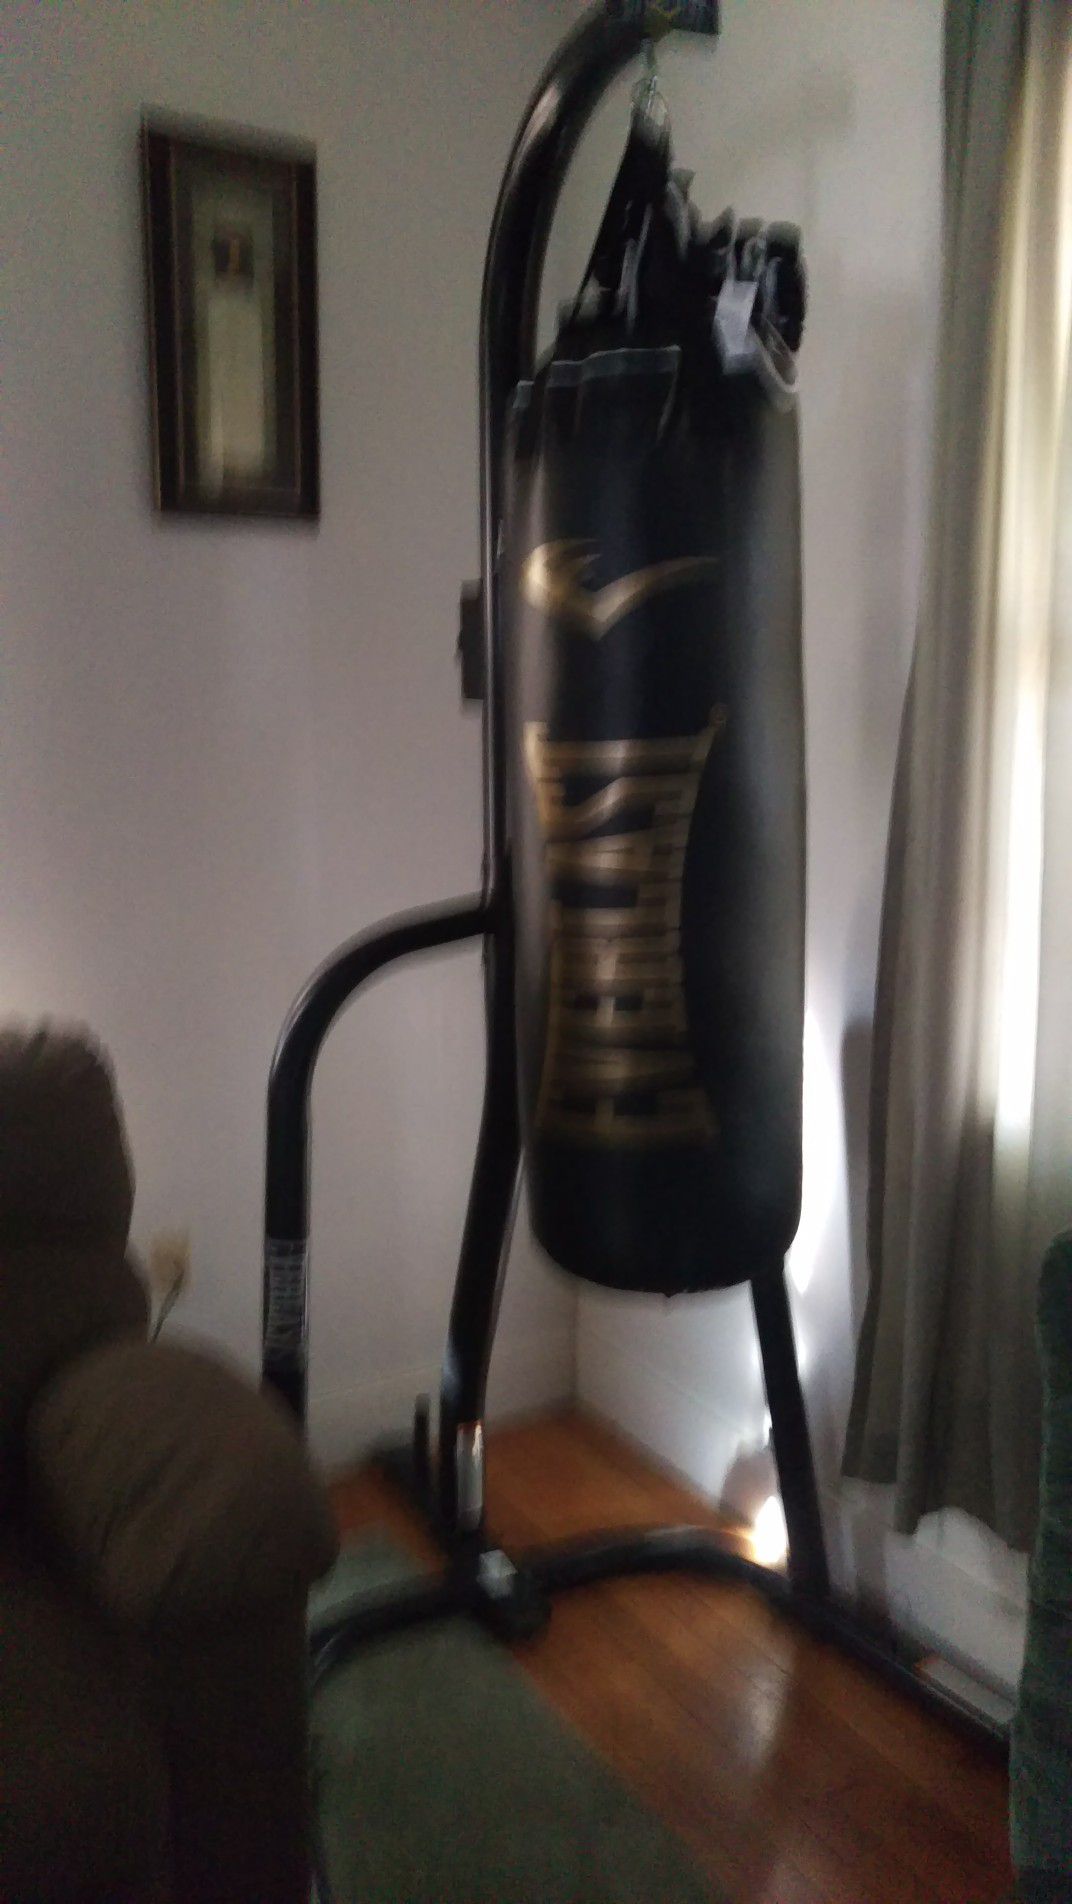 Everlast punching bag and gloves newly bought two weeks ago for 250 and gloves 30. Selling both for 100